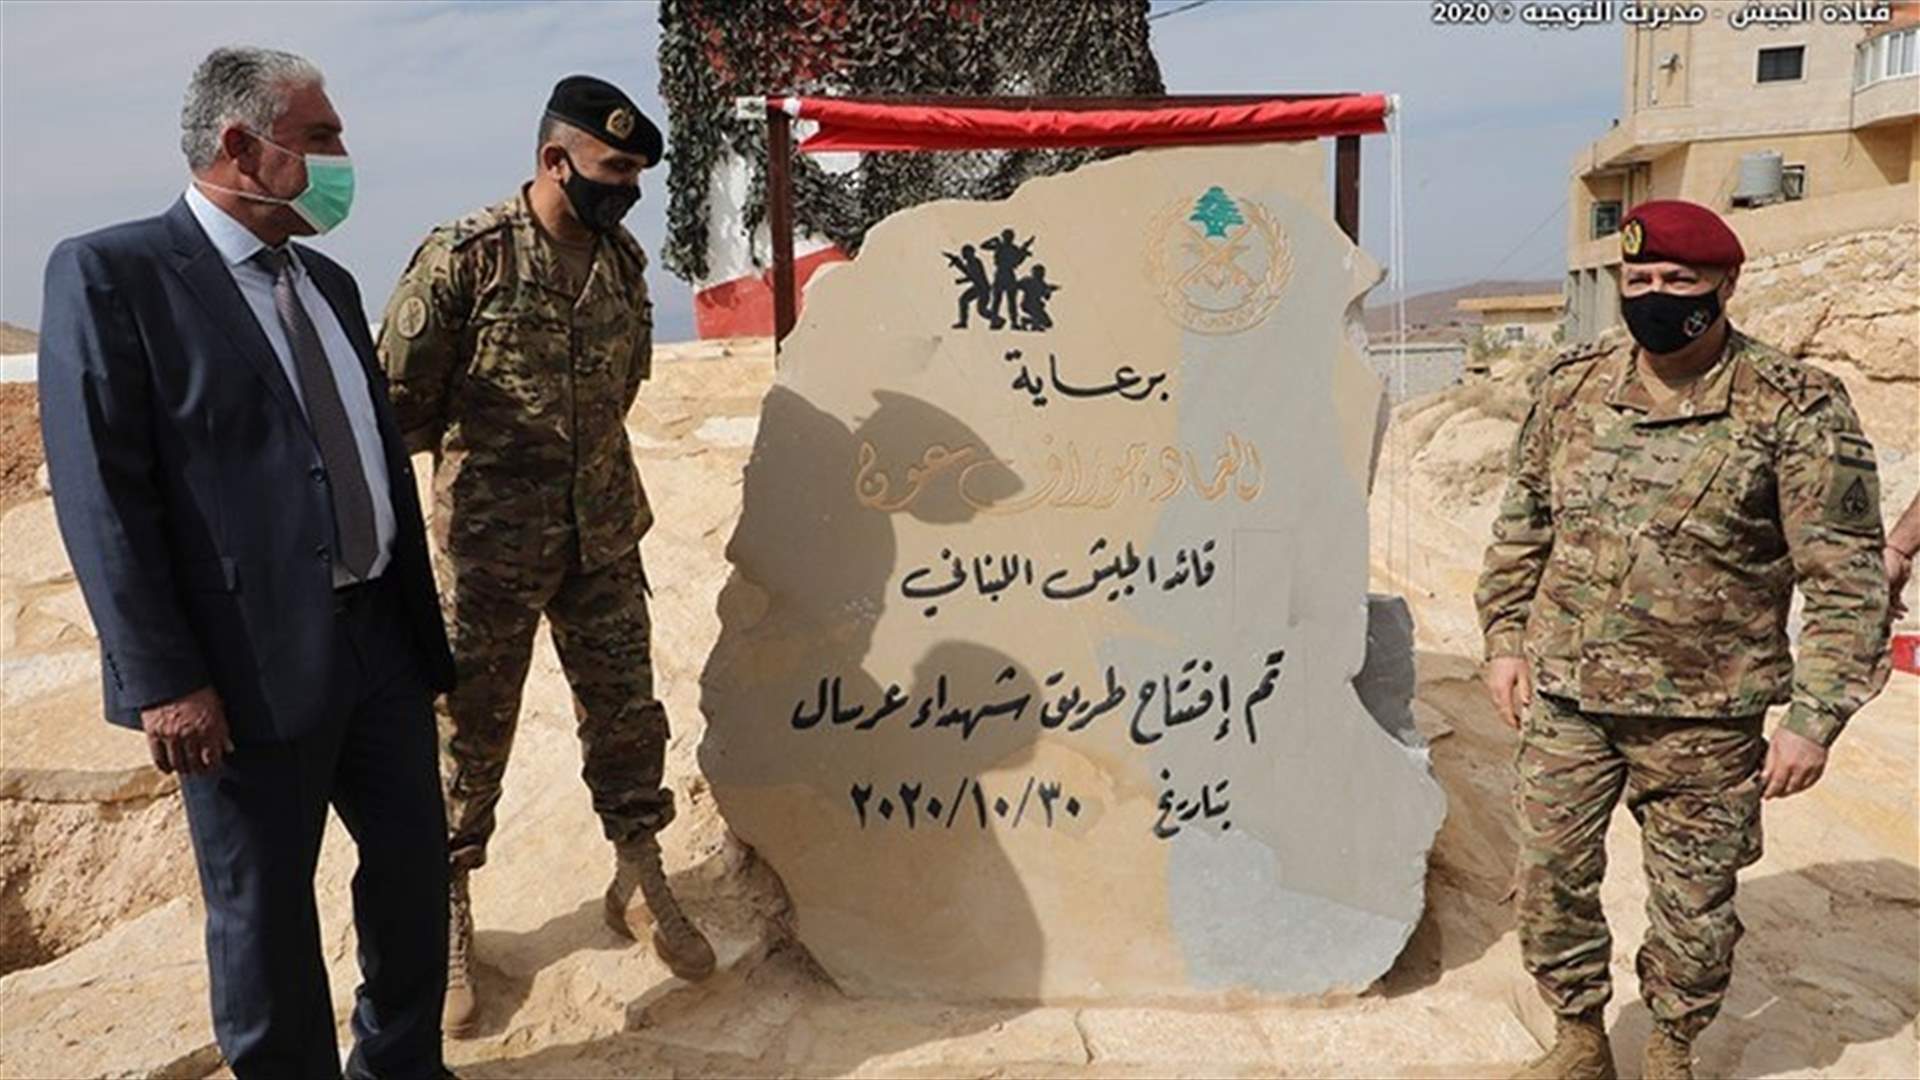 LAF Commander inaugurates Arsal Martyrs Road